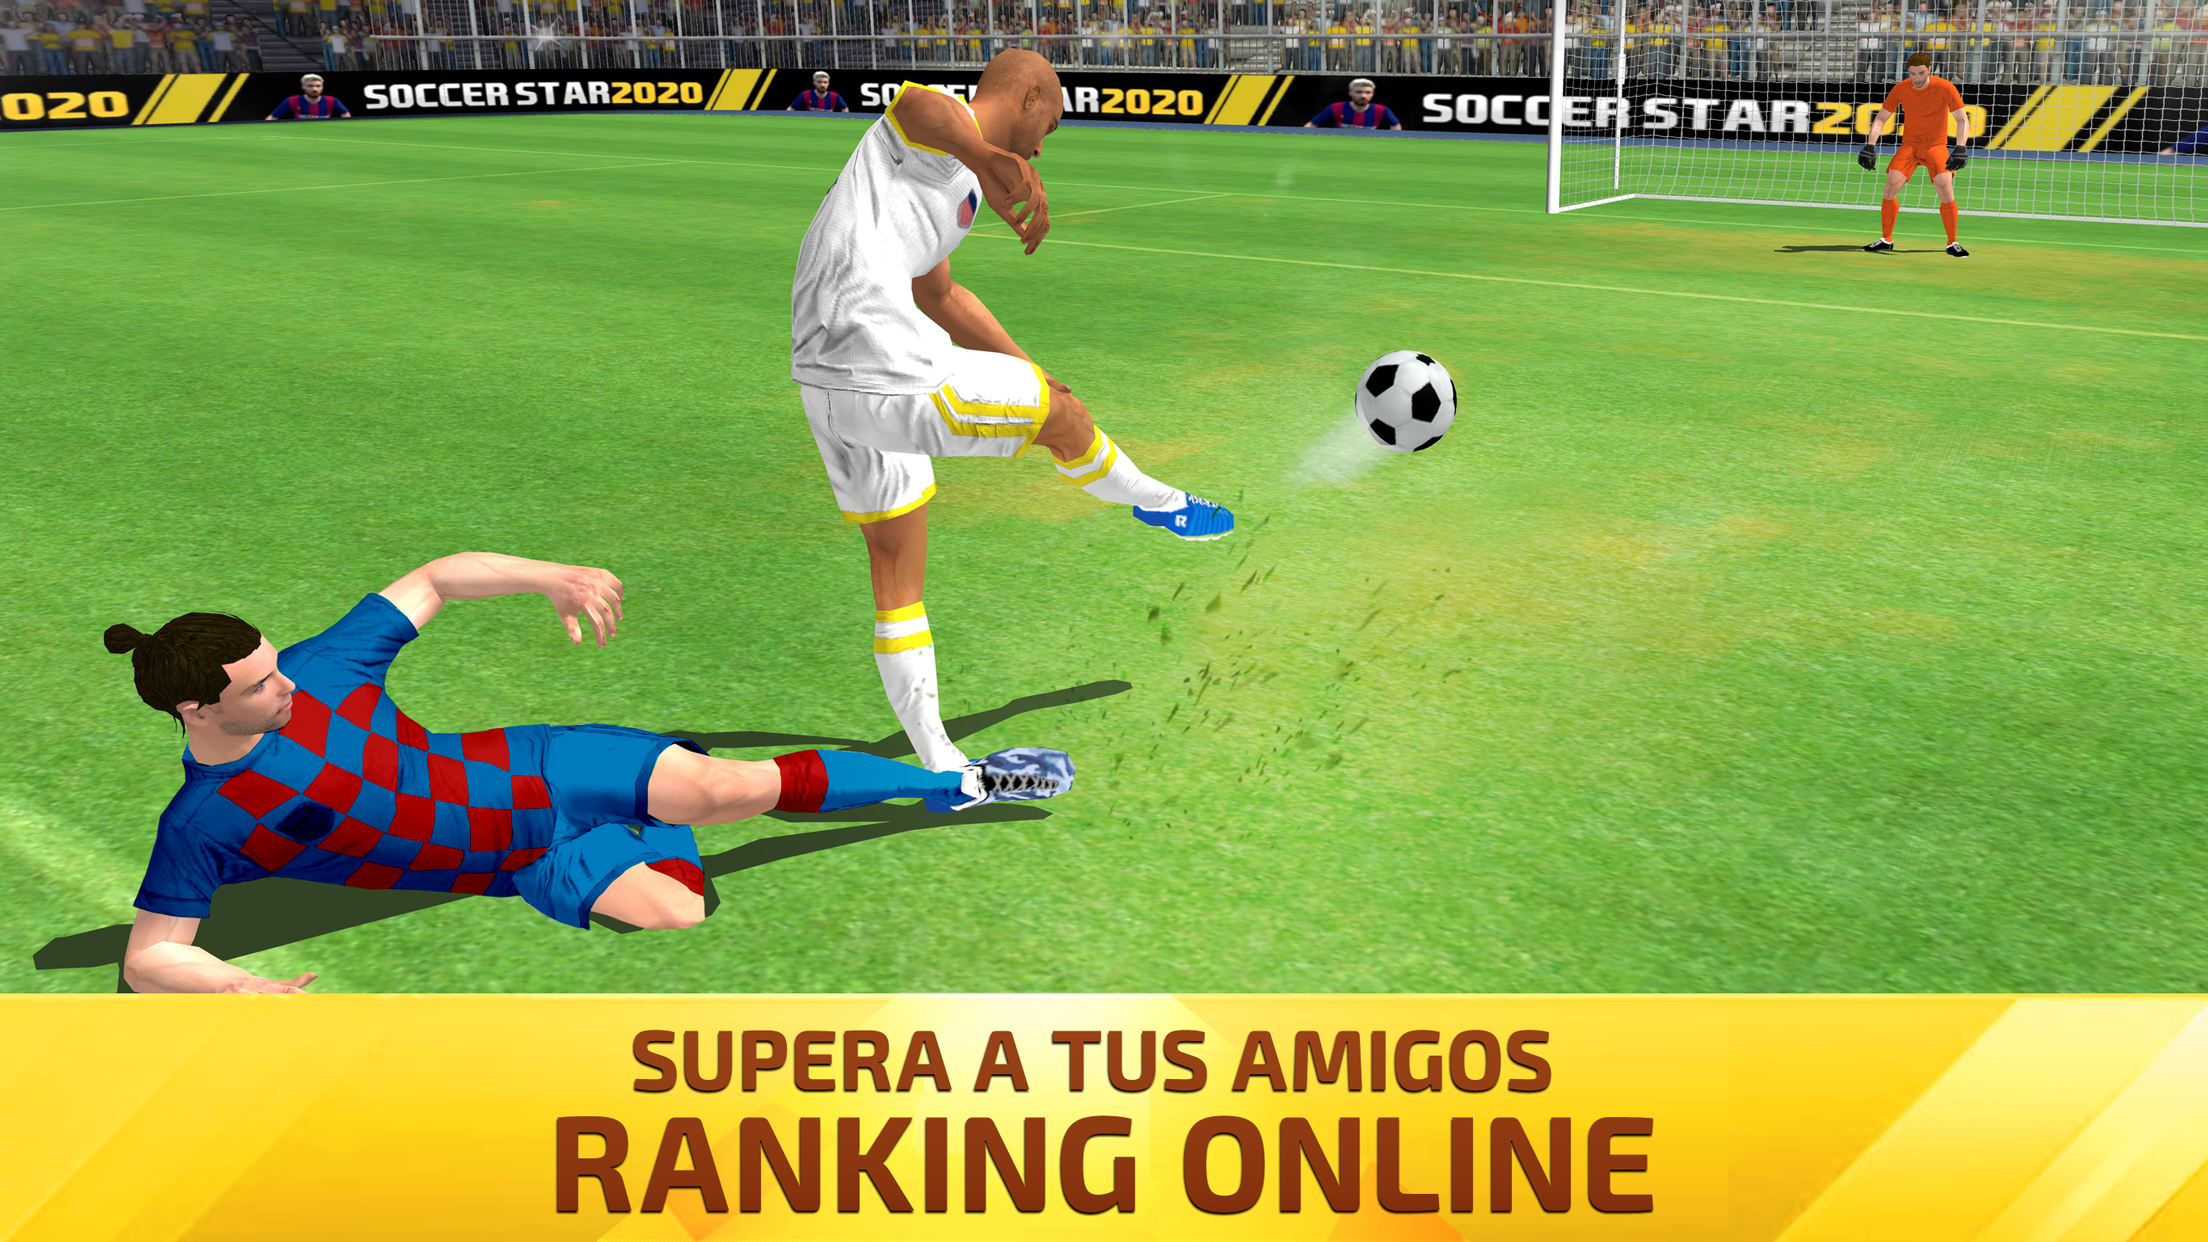 SoccerStar for Android - Download the APK from Uptodown